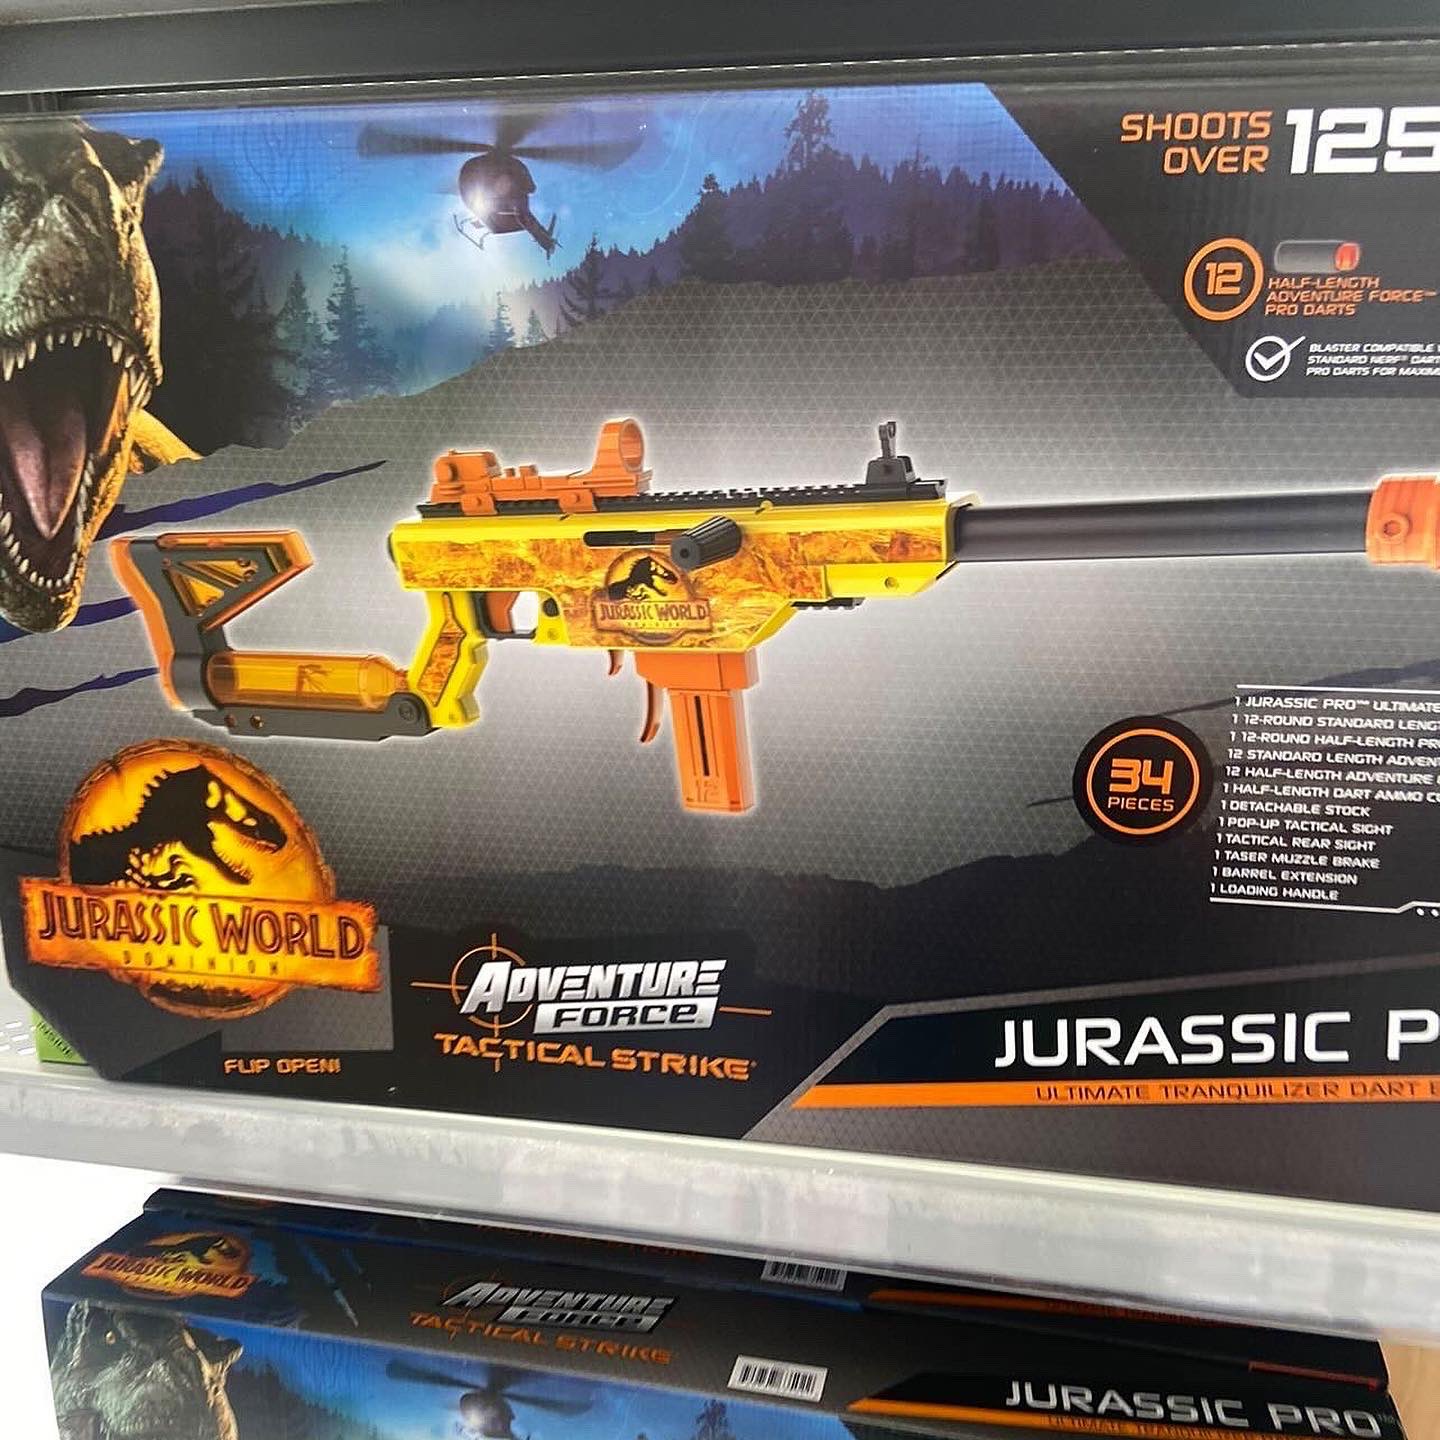 Collect Jurassic on Twitter: "LOCKED N' LOADED! Watch out Claire, Walmart  is arming up for the release of Jurassic World Dominion with the new  “Jurassic Pro” dart gun — part of their